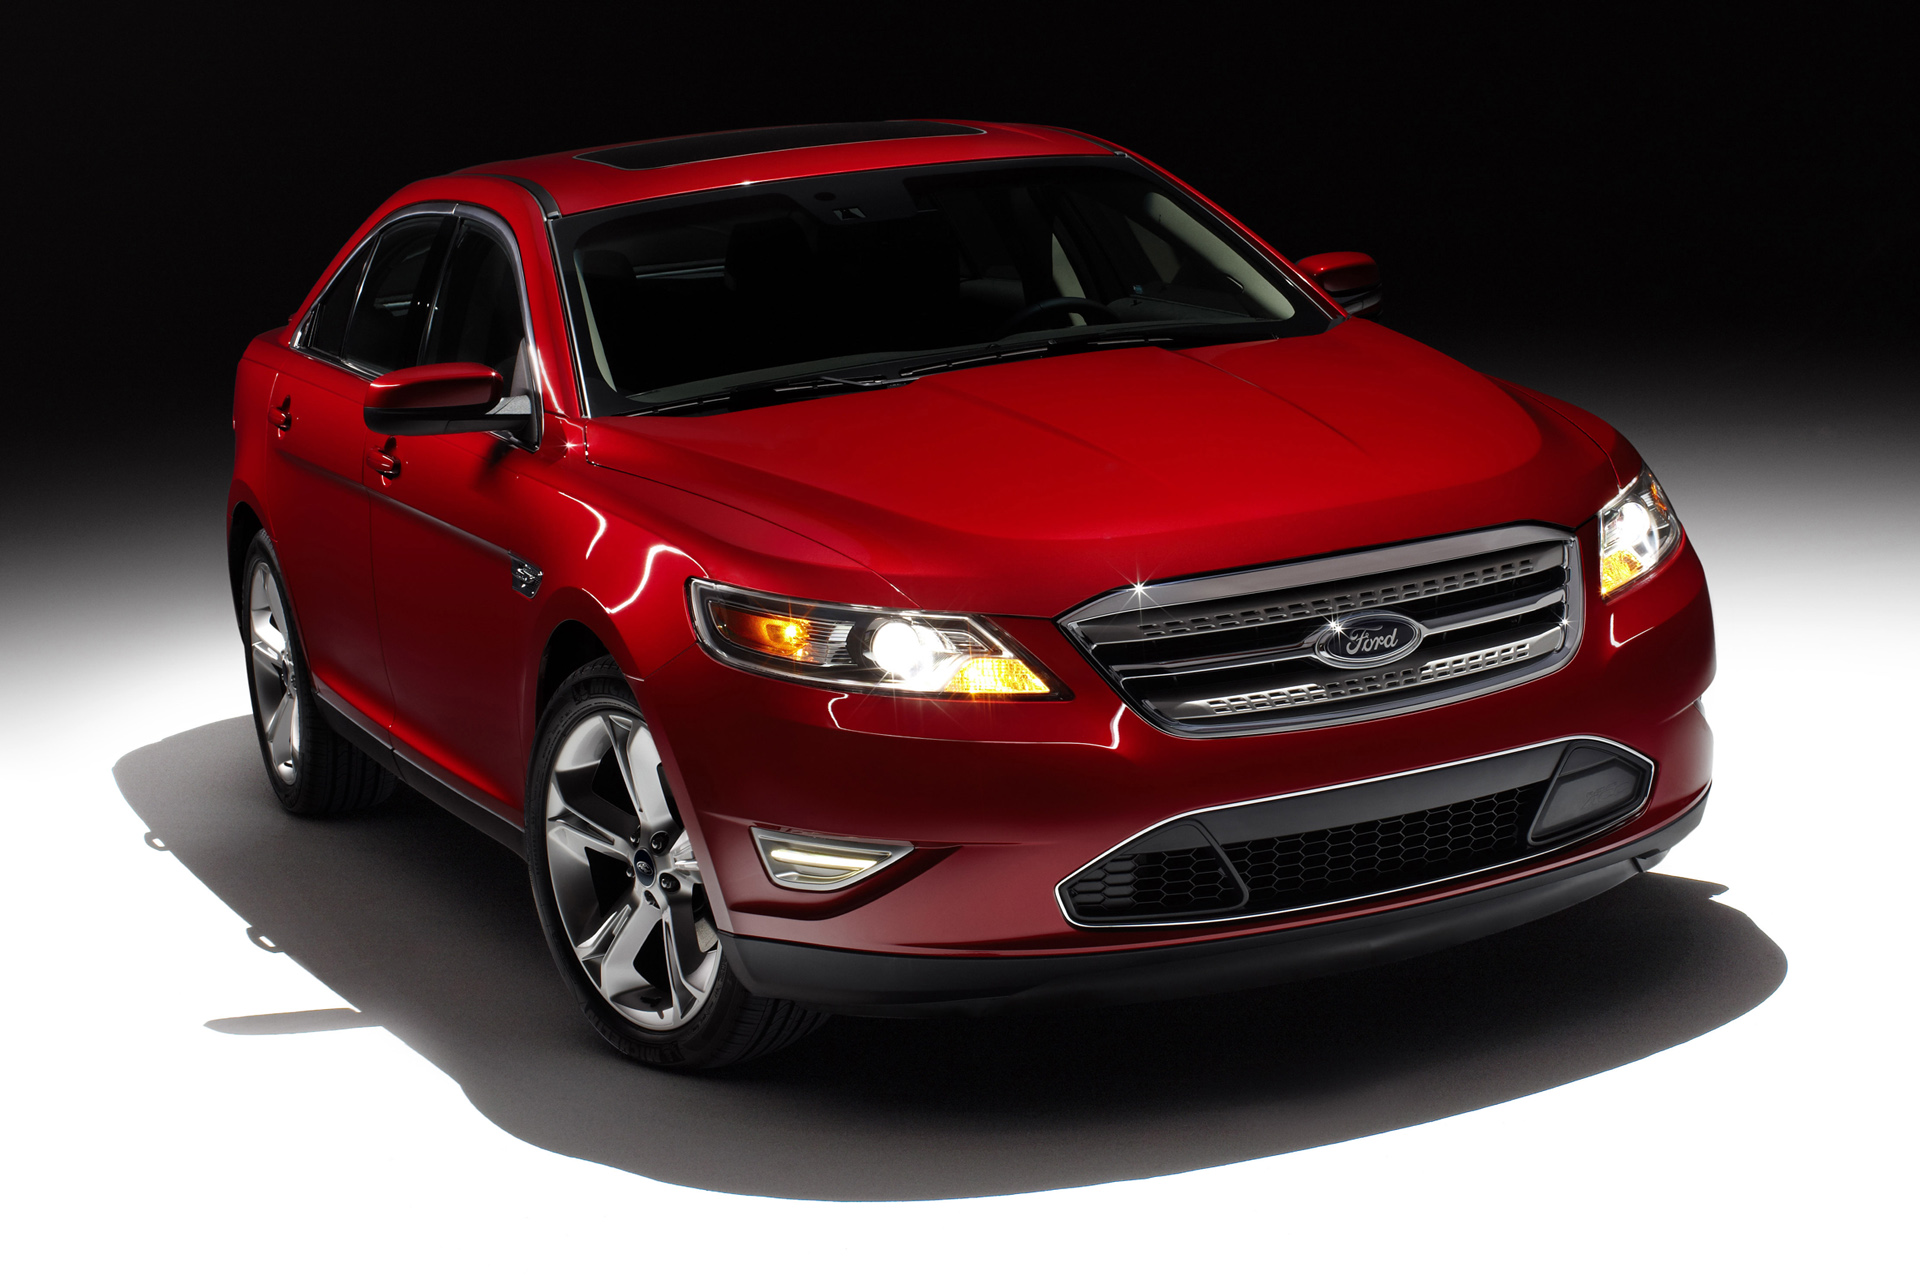 Ford taurus sho message boards #3